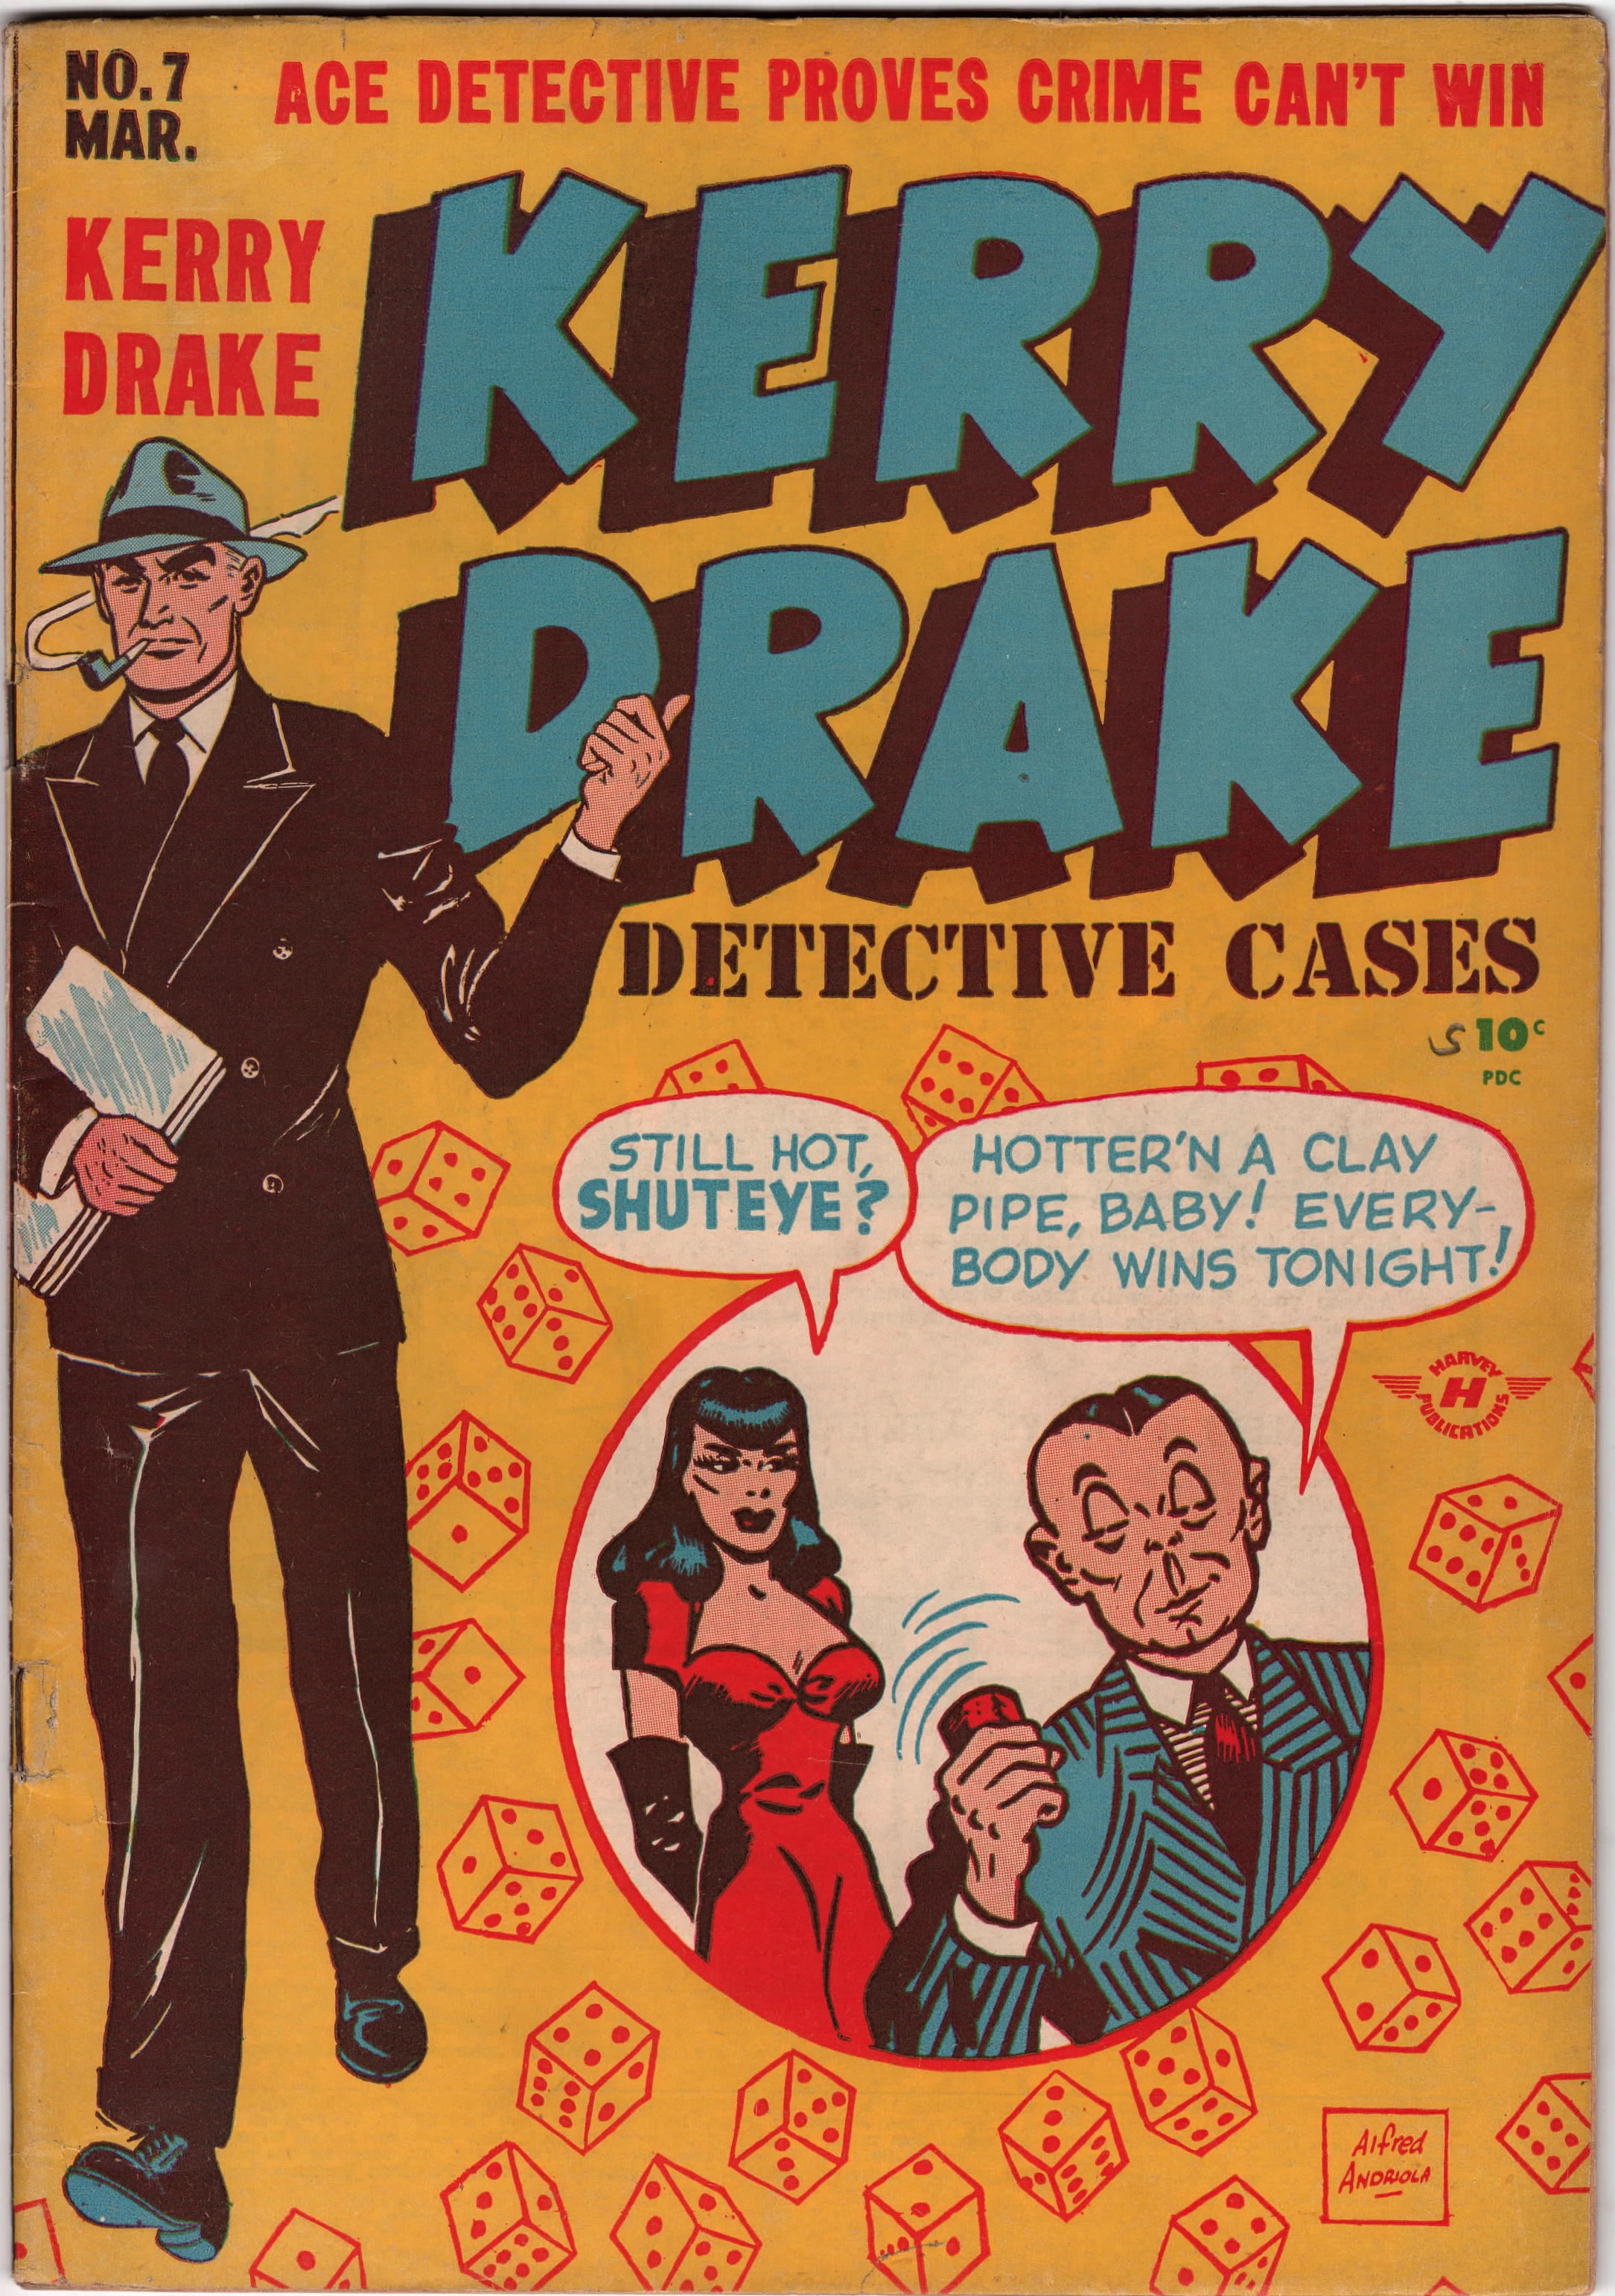 Kerry Drake Detective Cases #07